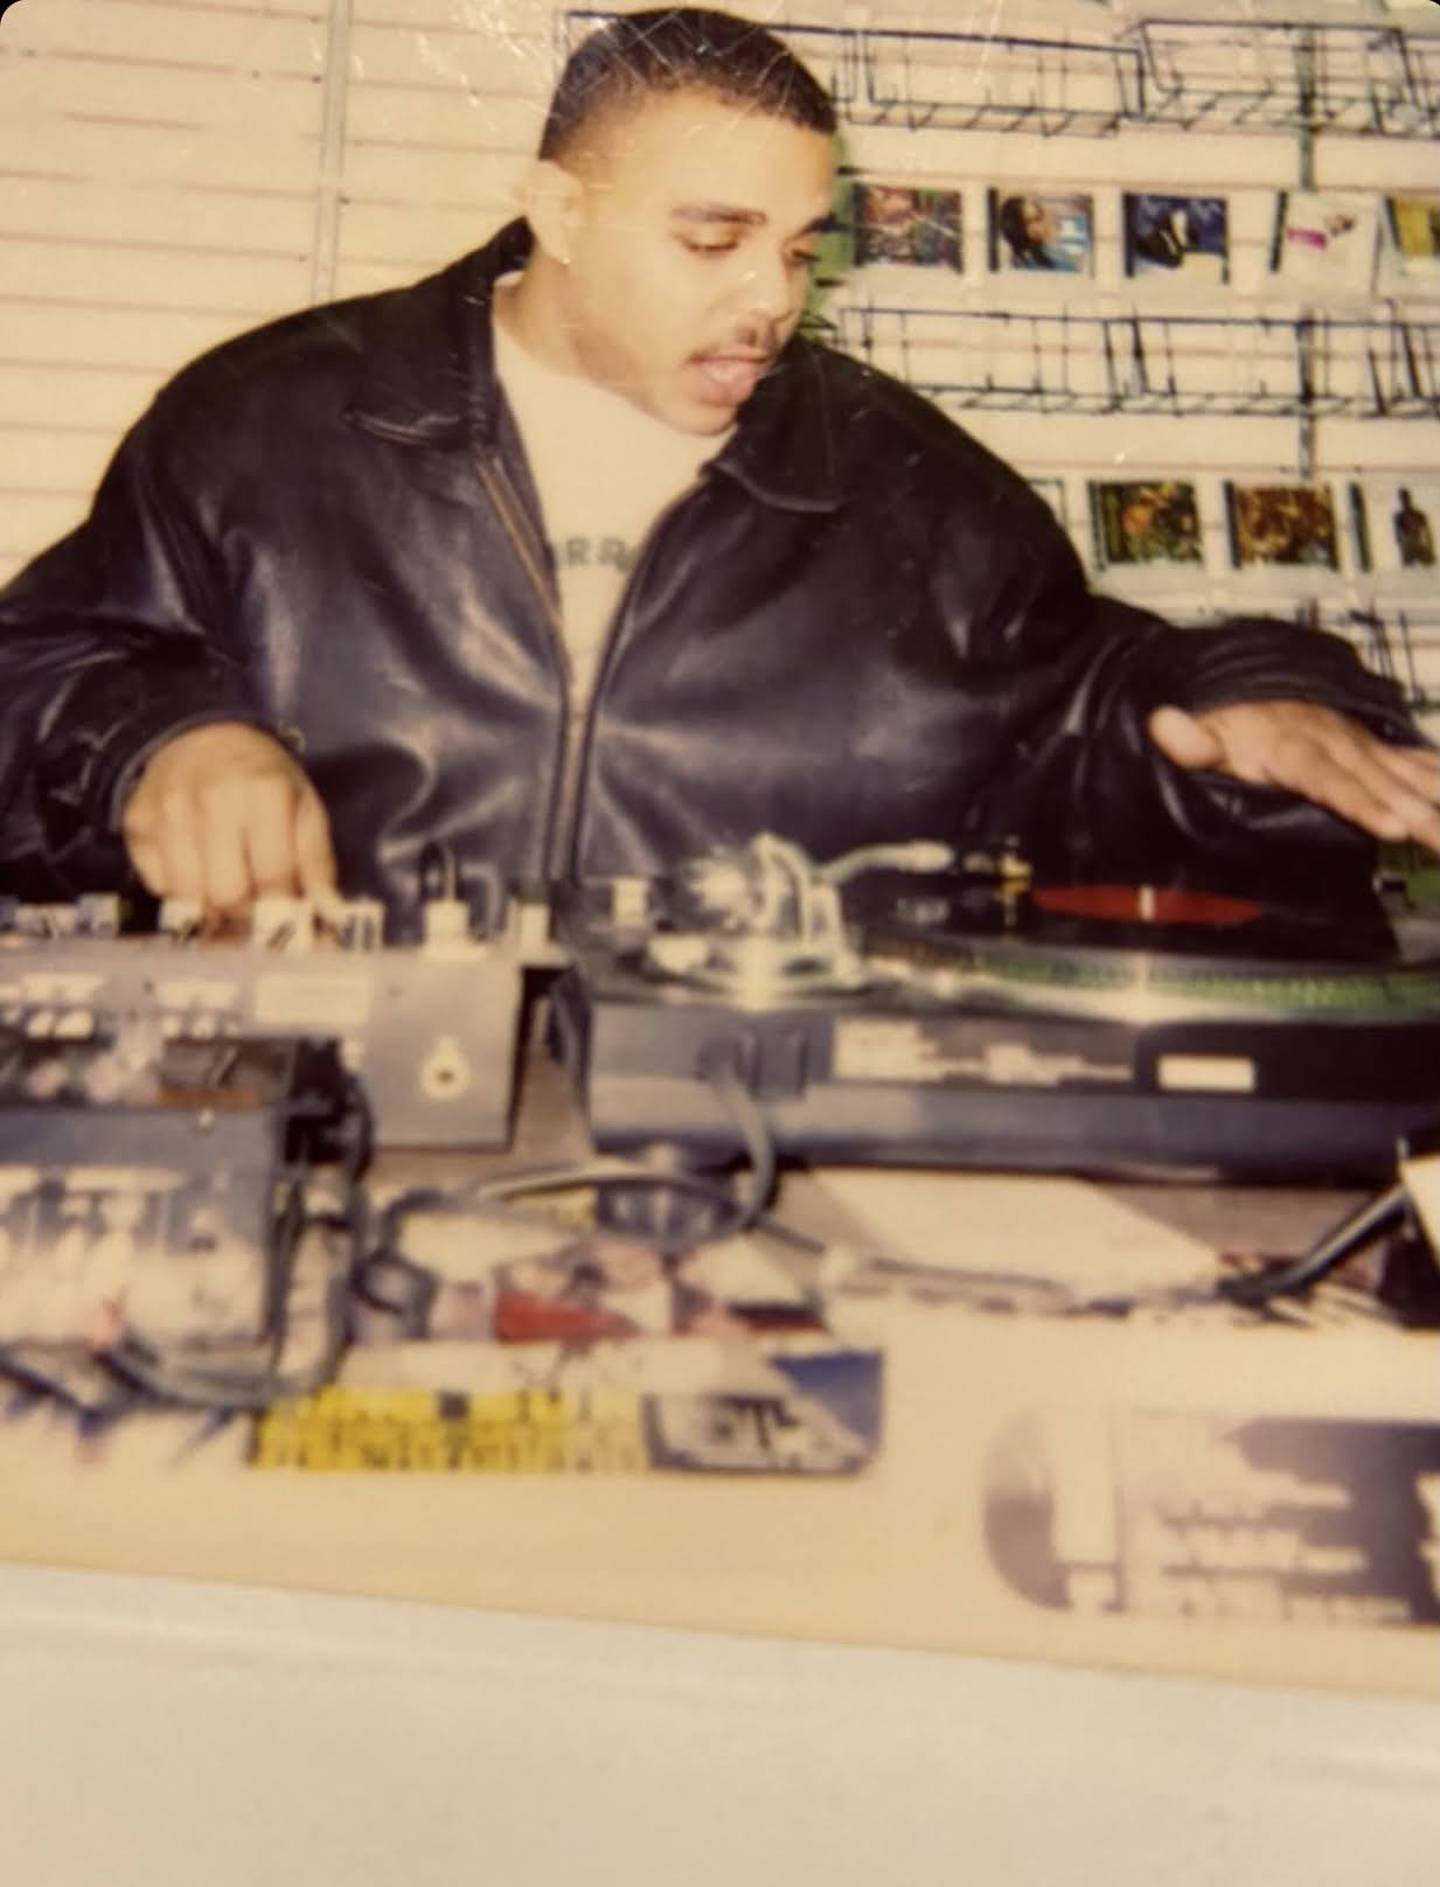 An throwback photo of DJ Shawn "Ceez" Caesar on the turntables in the middle of a set.